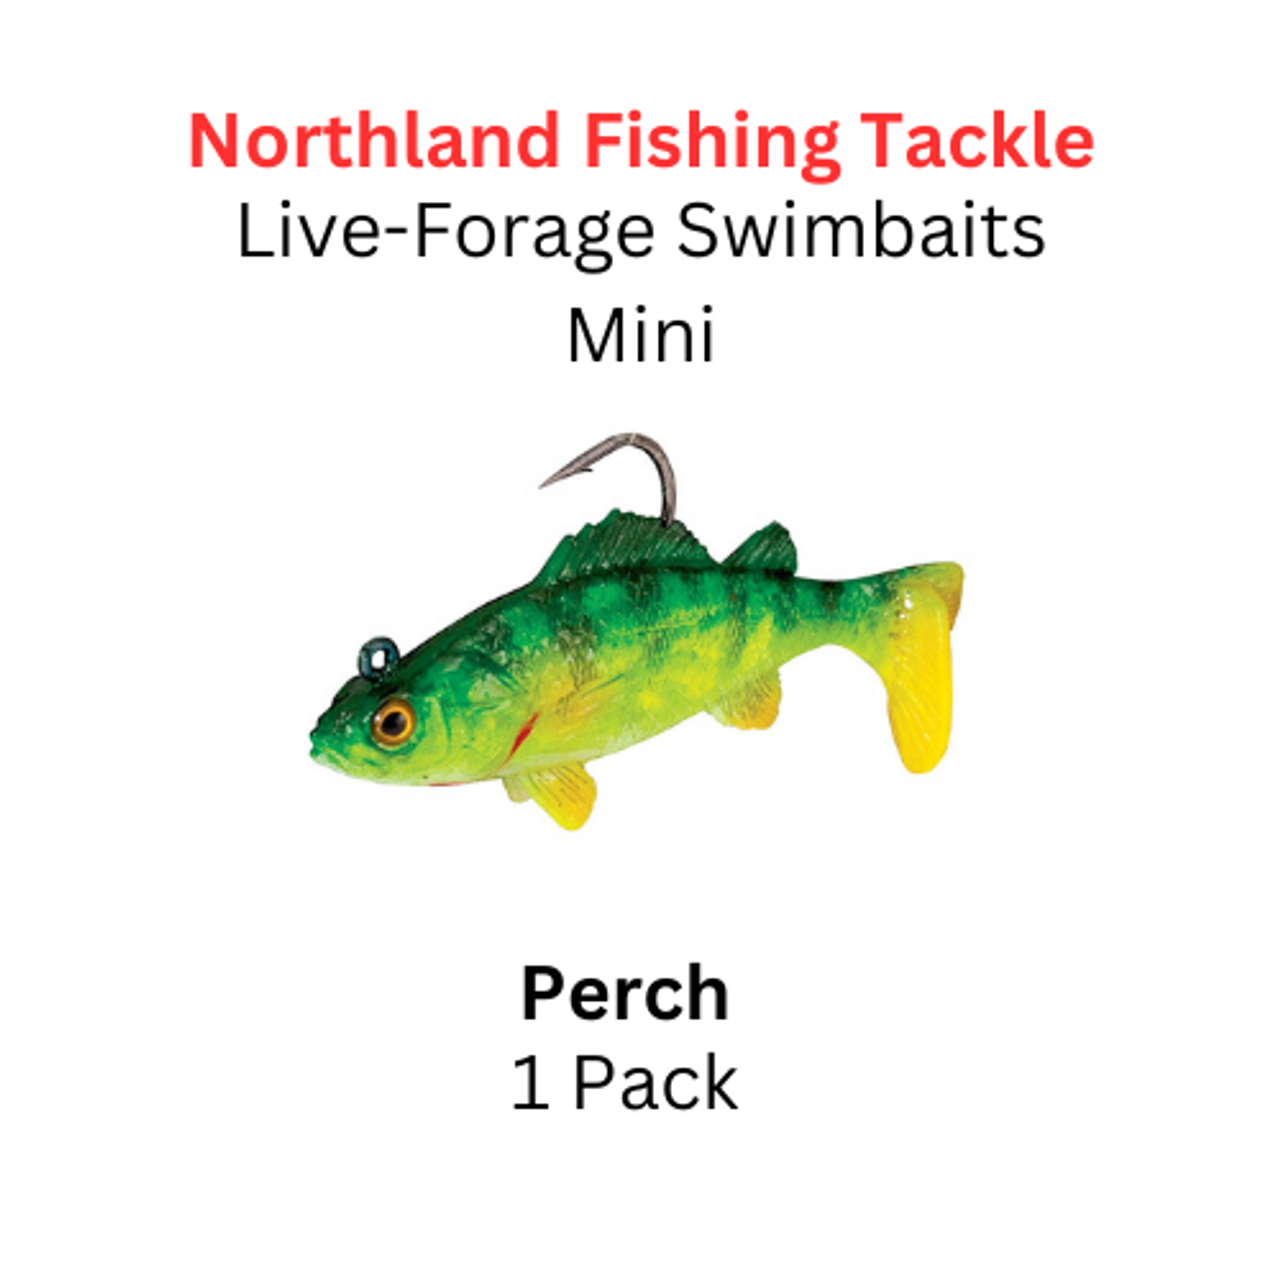 https://cdn11.bigcommerce.com/s-u9nbd/images/stencil/1280x1280/products/6450/16283/Northland_Fishing_Tackle_Live_forage_swimbait_mini_Perch__25229.1678229777.png?c=2